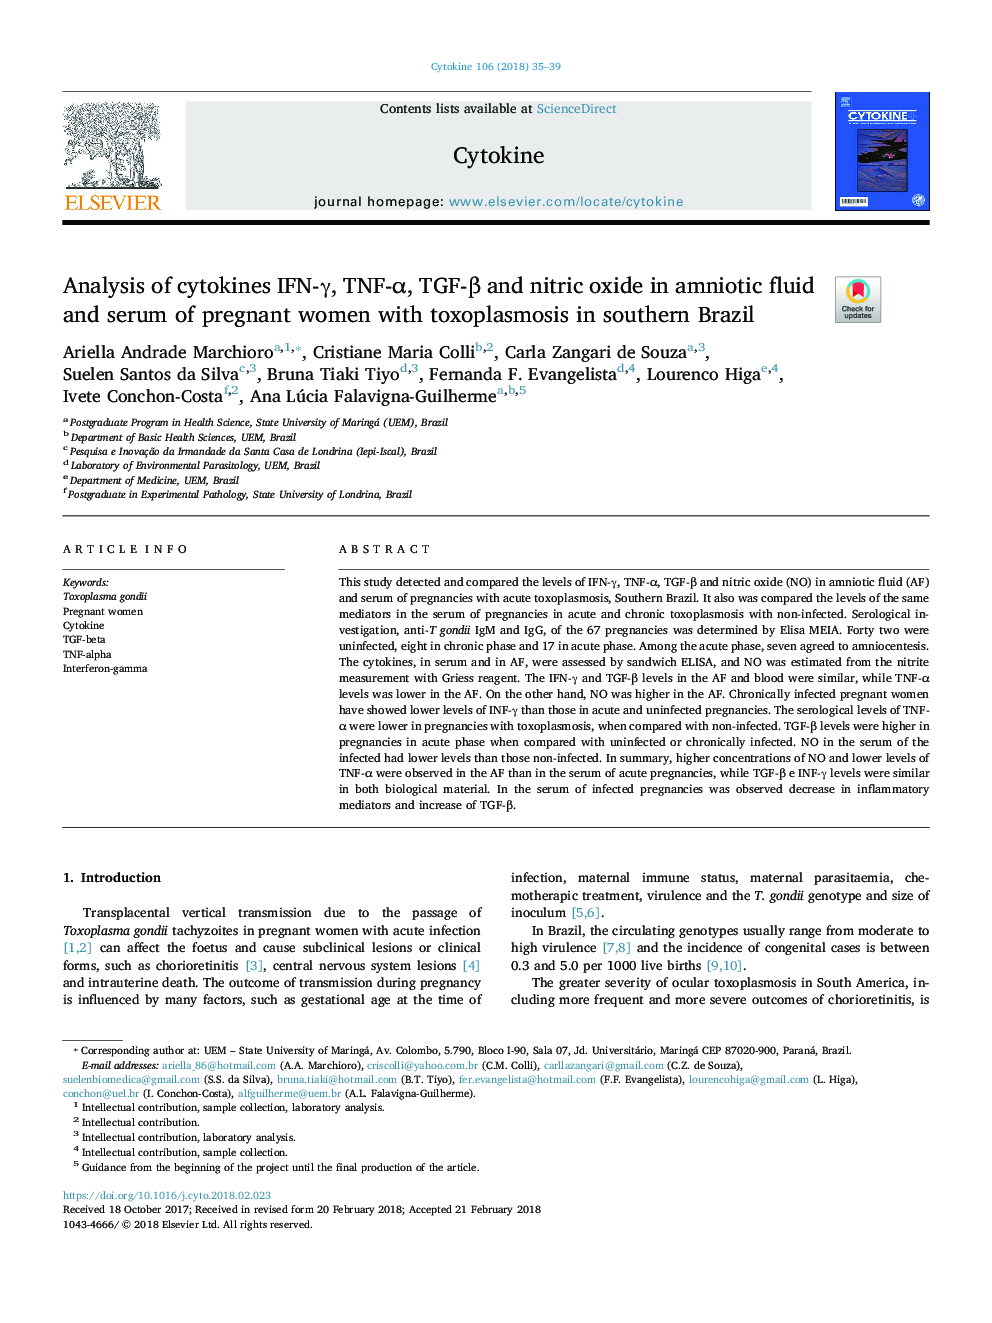 Analysis of cytokines IFN-Î³, TNF-Î±, TGF-Î² and nitric oxide in amniotic fluid and serum of pregnant women with toxoplasmosis in southern Brazil